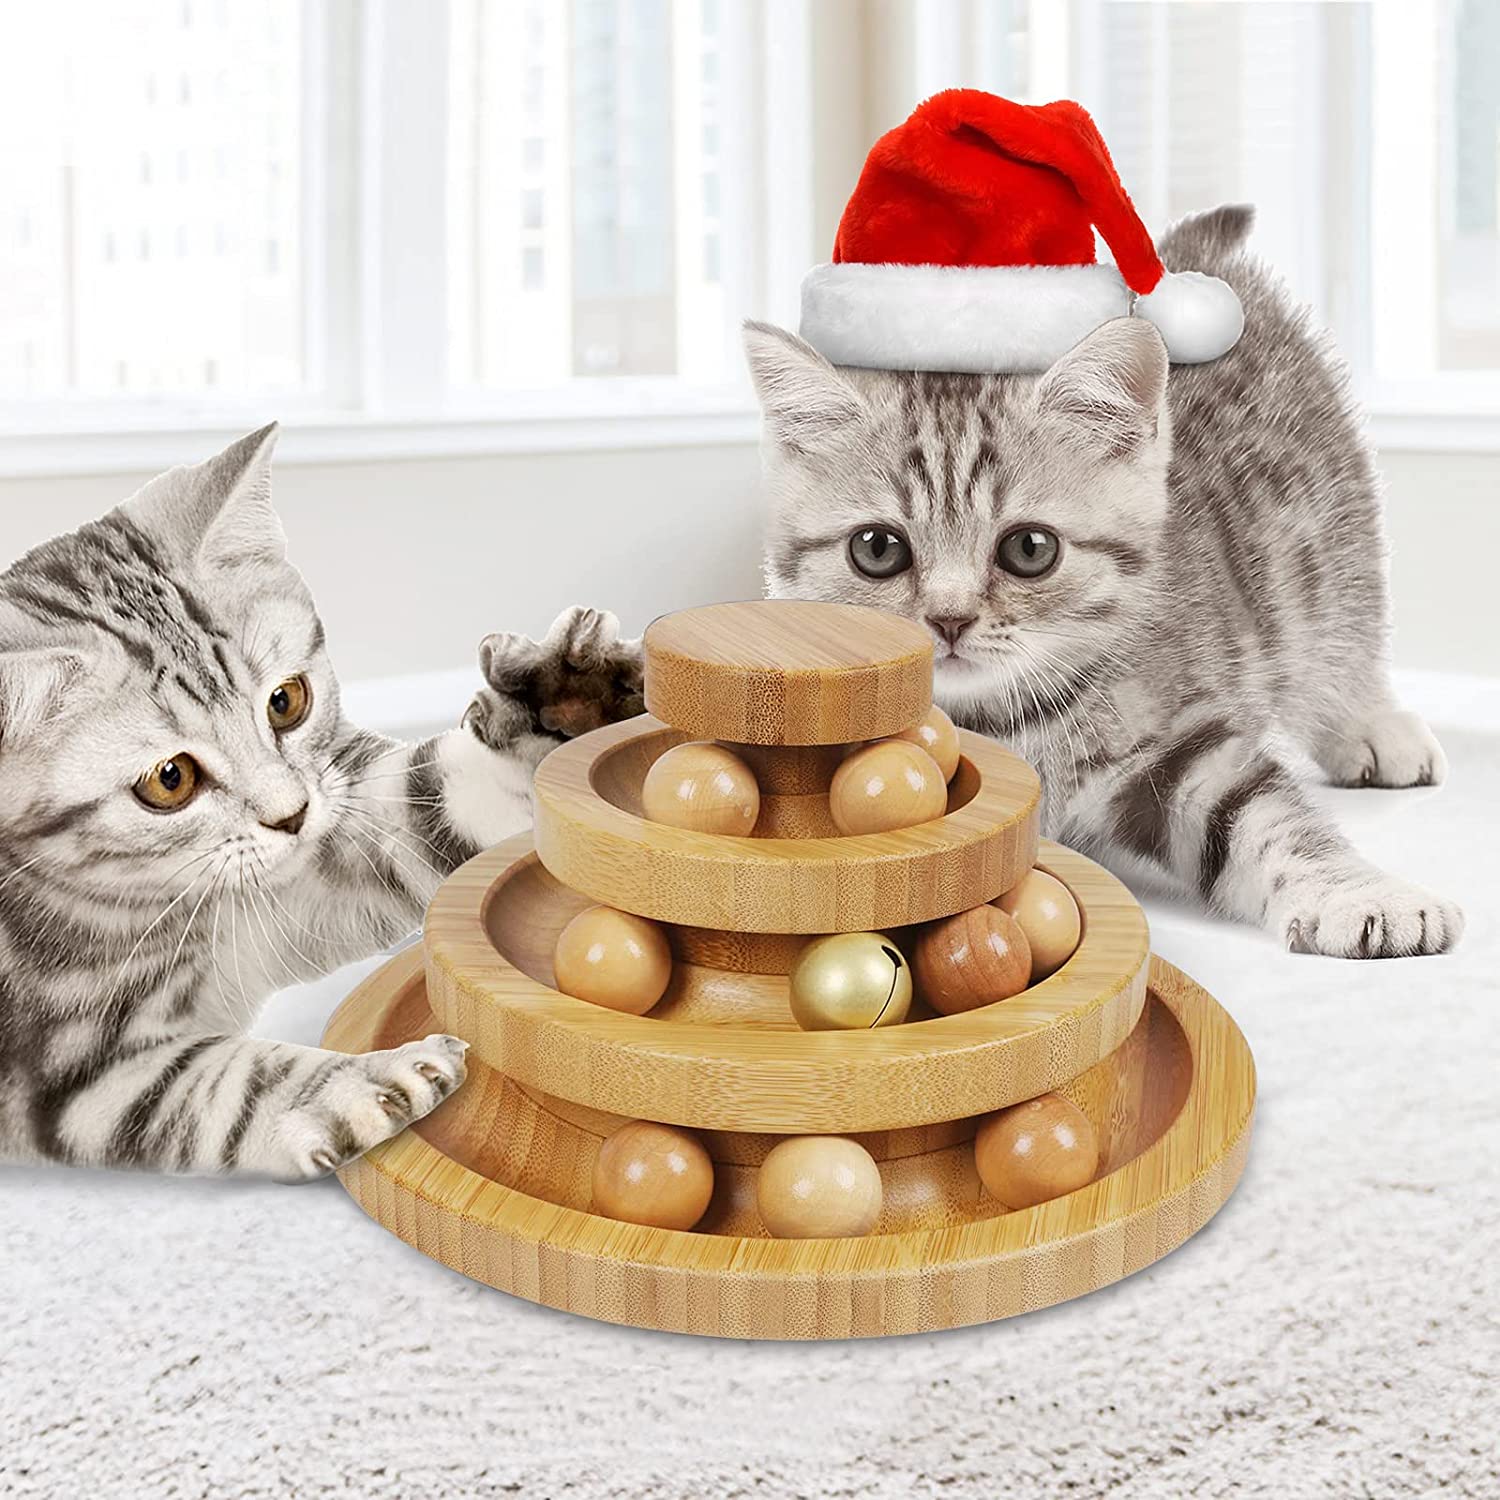 Ginkko Interactive Bamboo Cat Toy with Bells, Kitten Toys for Indoor Cats,-Three Layer Track Balls Turntable for Kitty Cat, Funny Roller Cat Tower Toys, Gifts for Your Cats